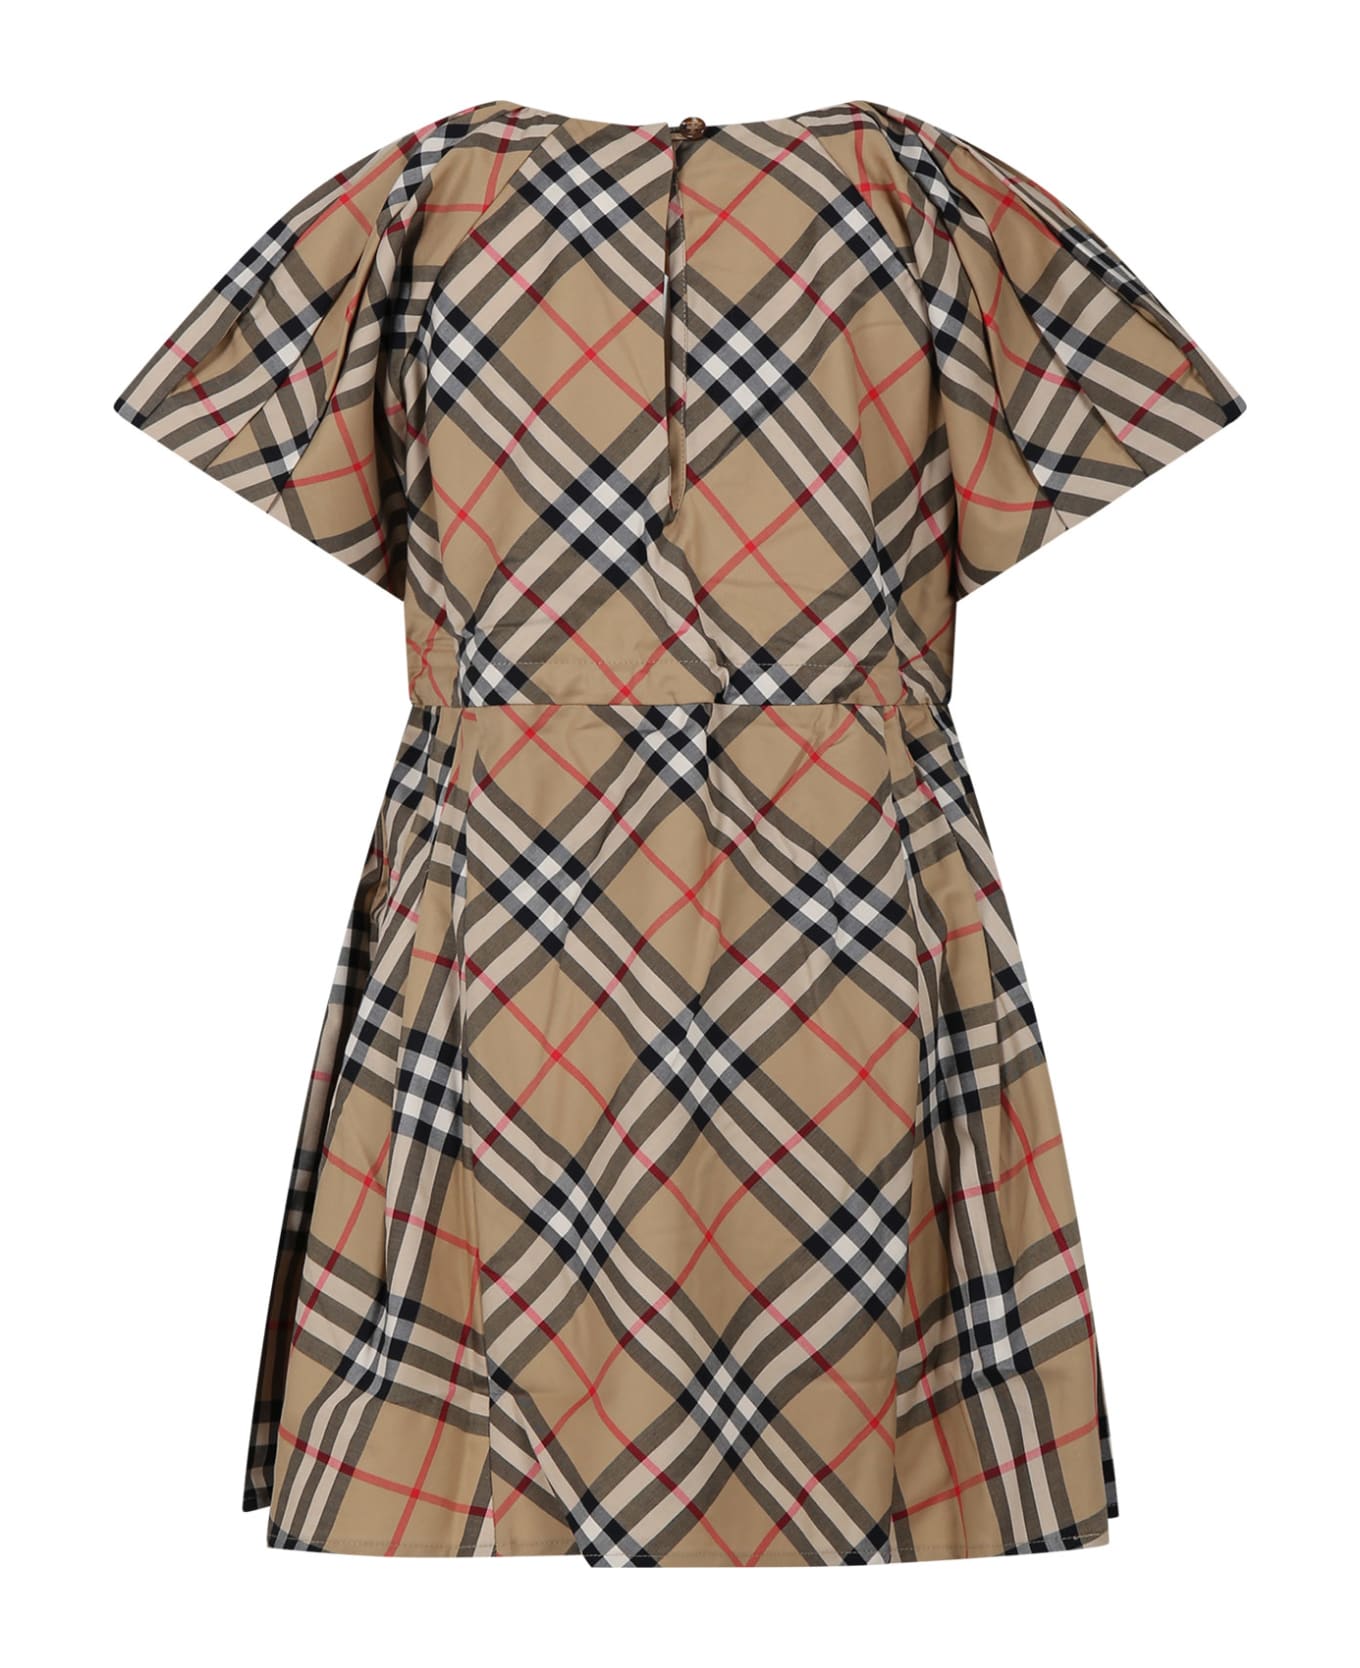 Burberry Beige Dress For Girl With Iconic All-over Vintage Check - Beige